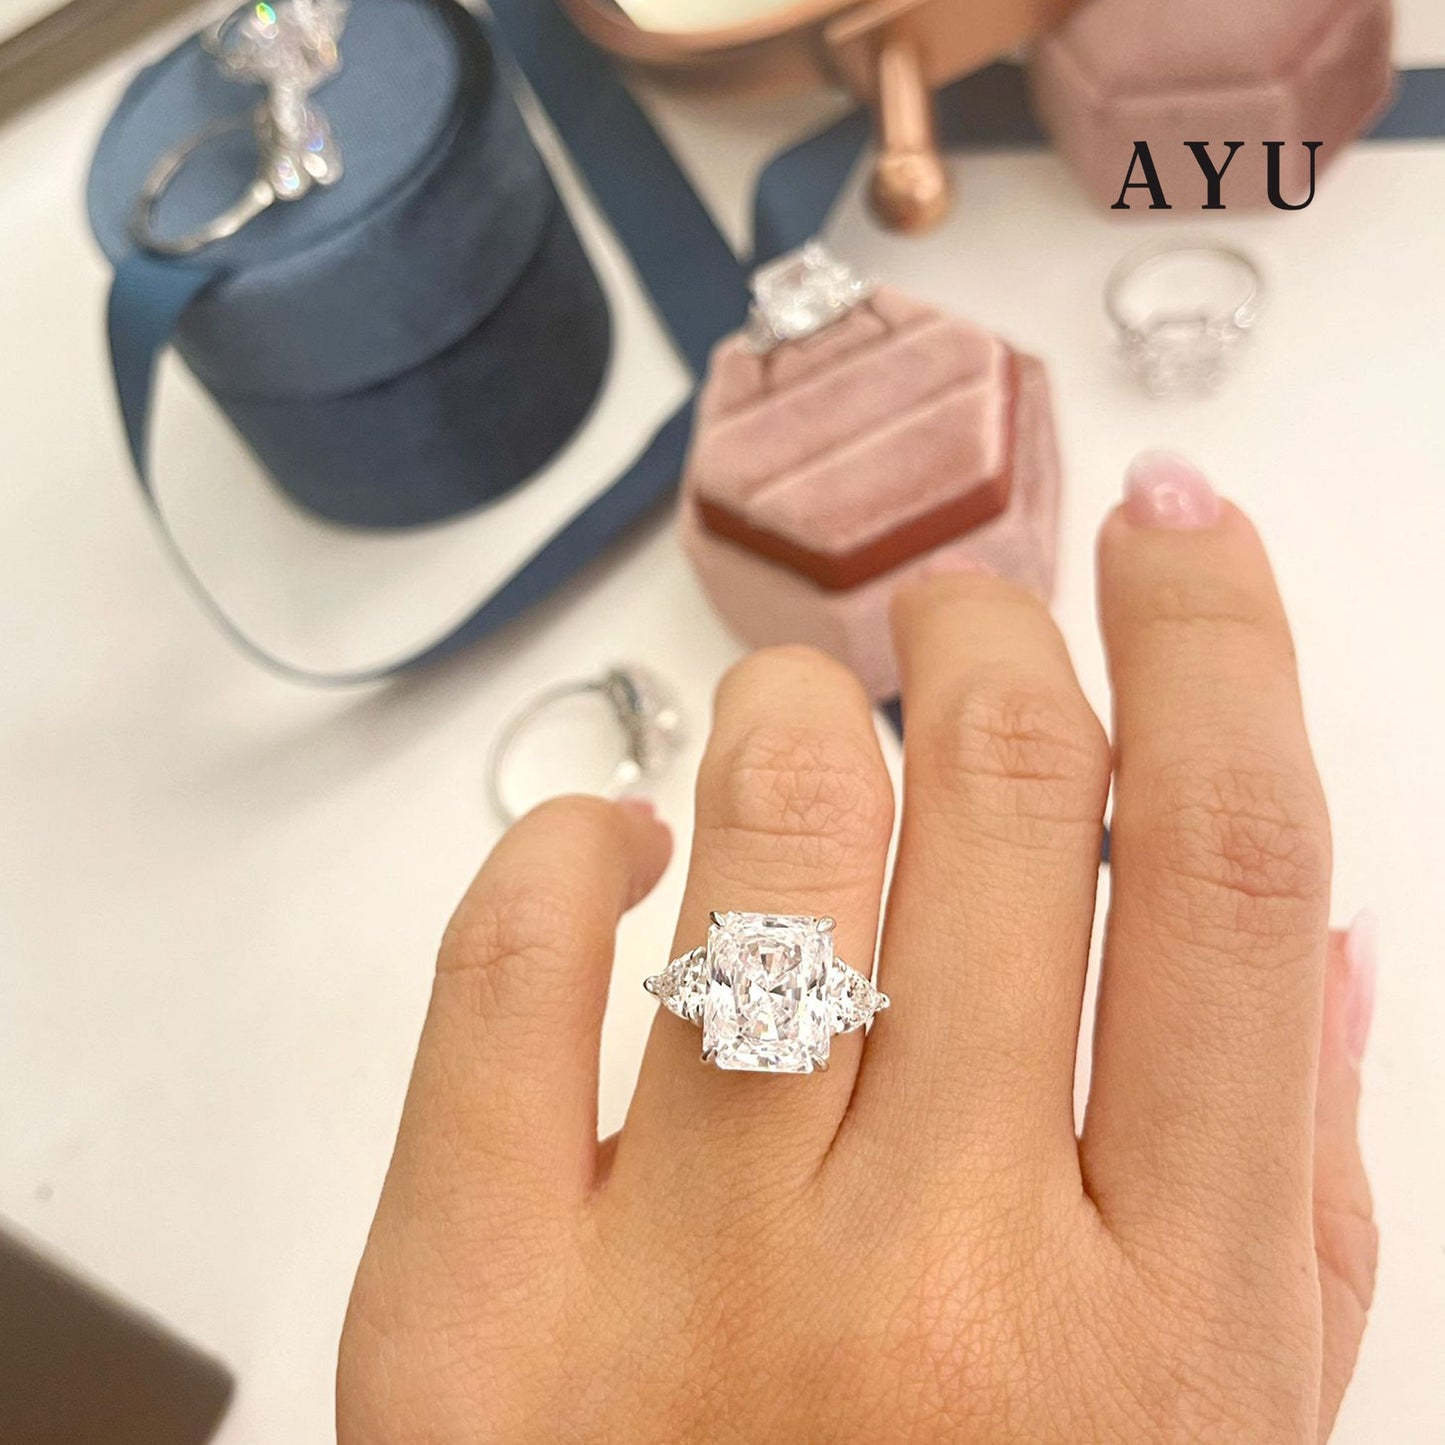 AYU GLAM EMERALD TRILOGY SOLITAIRE RING 17K WHITE GOLD